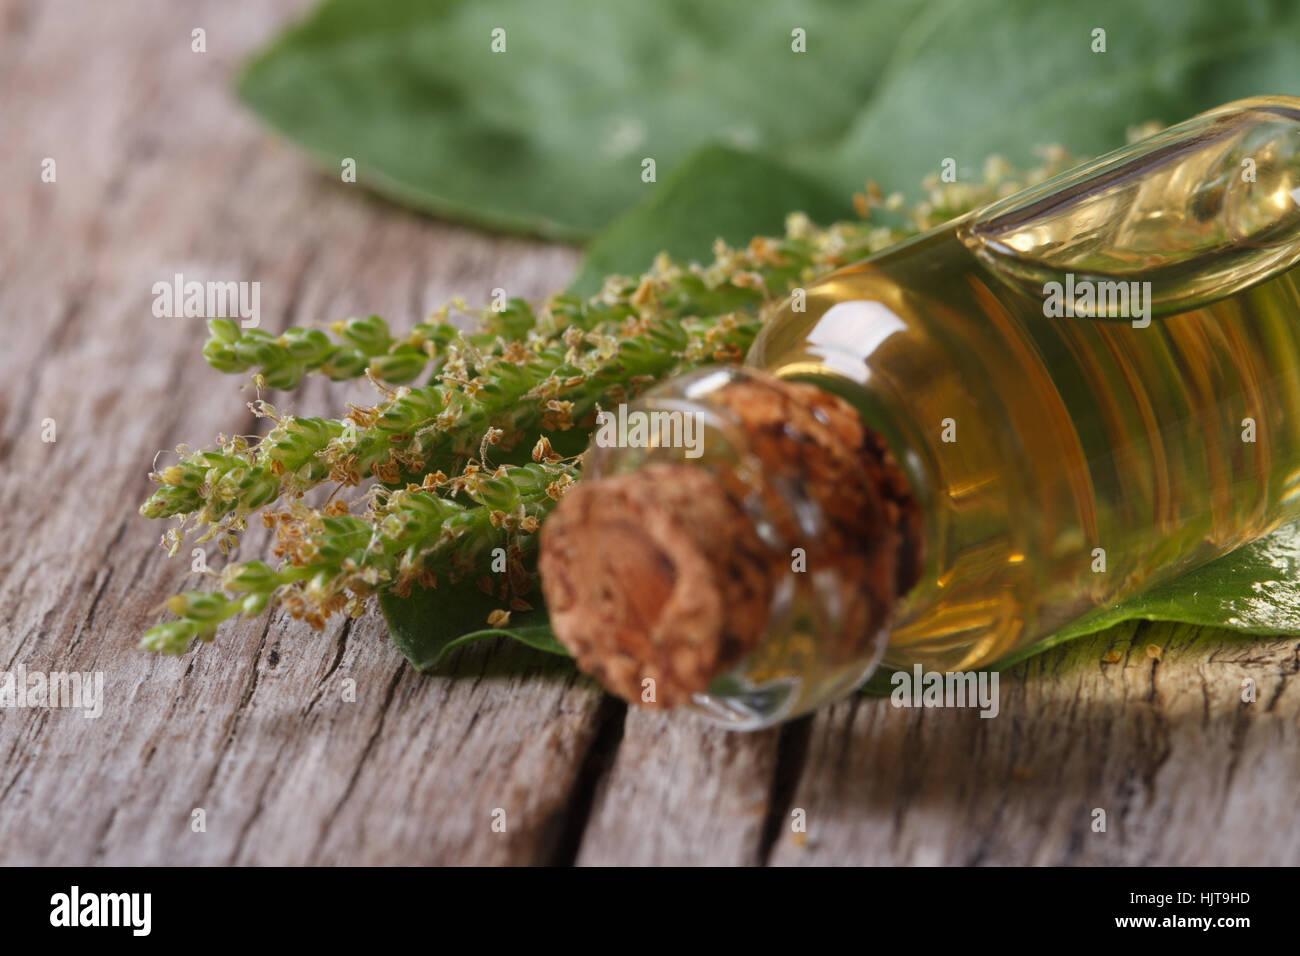 Macro plantain extract in glass bottle on a wooden background horizontal Stock Photo